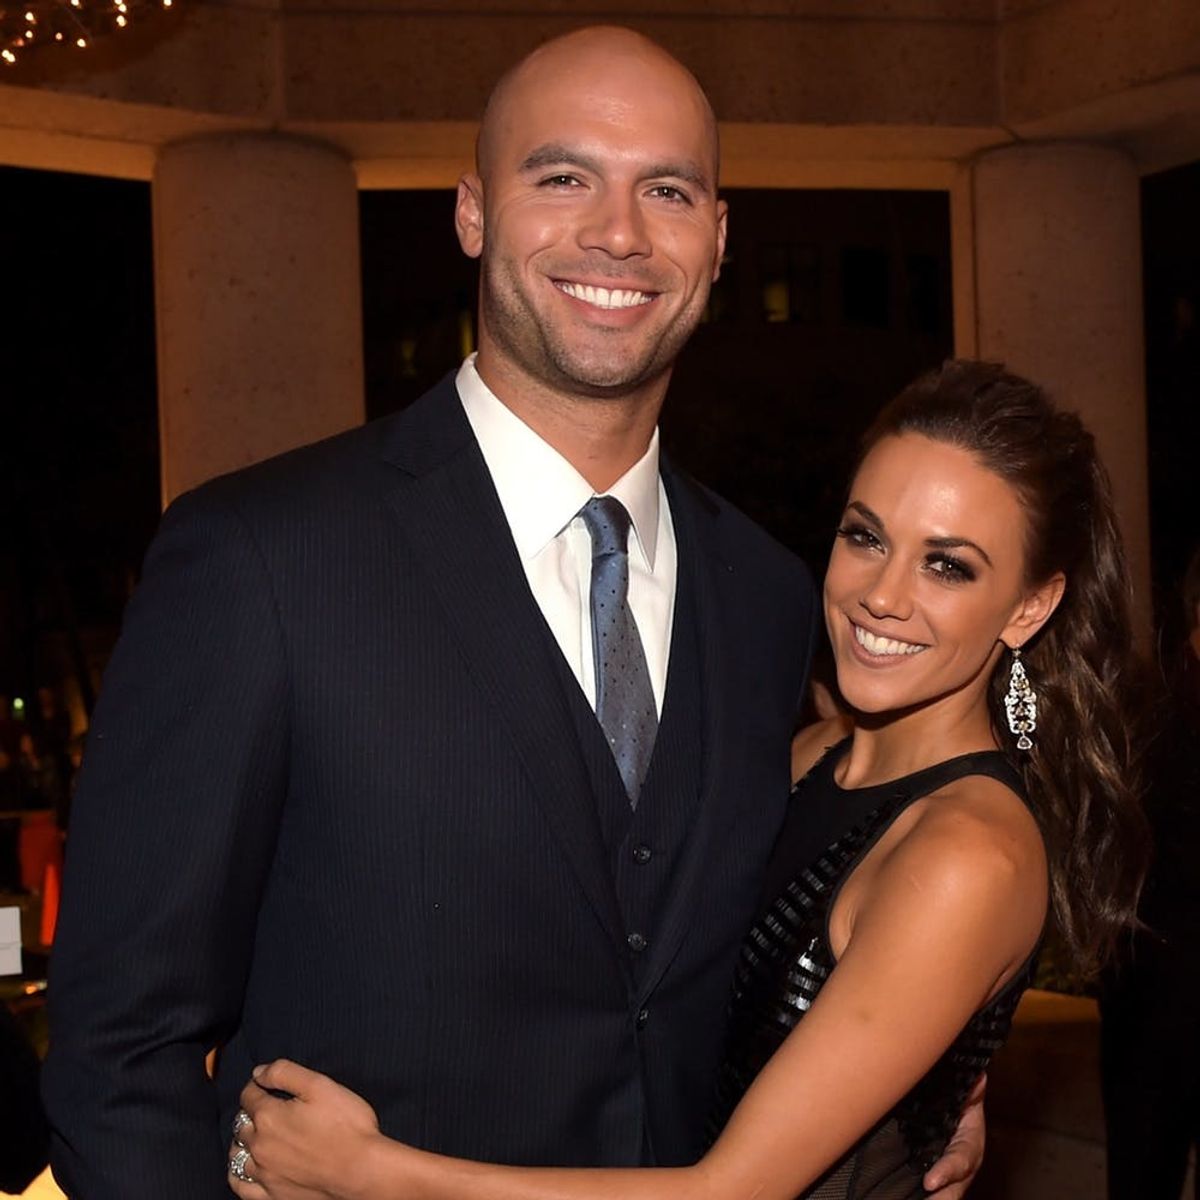 Jana Kramer and Husband Mike Caussin Renew Their Wedding Vows After a Heartbreaking Year